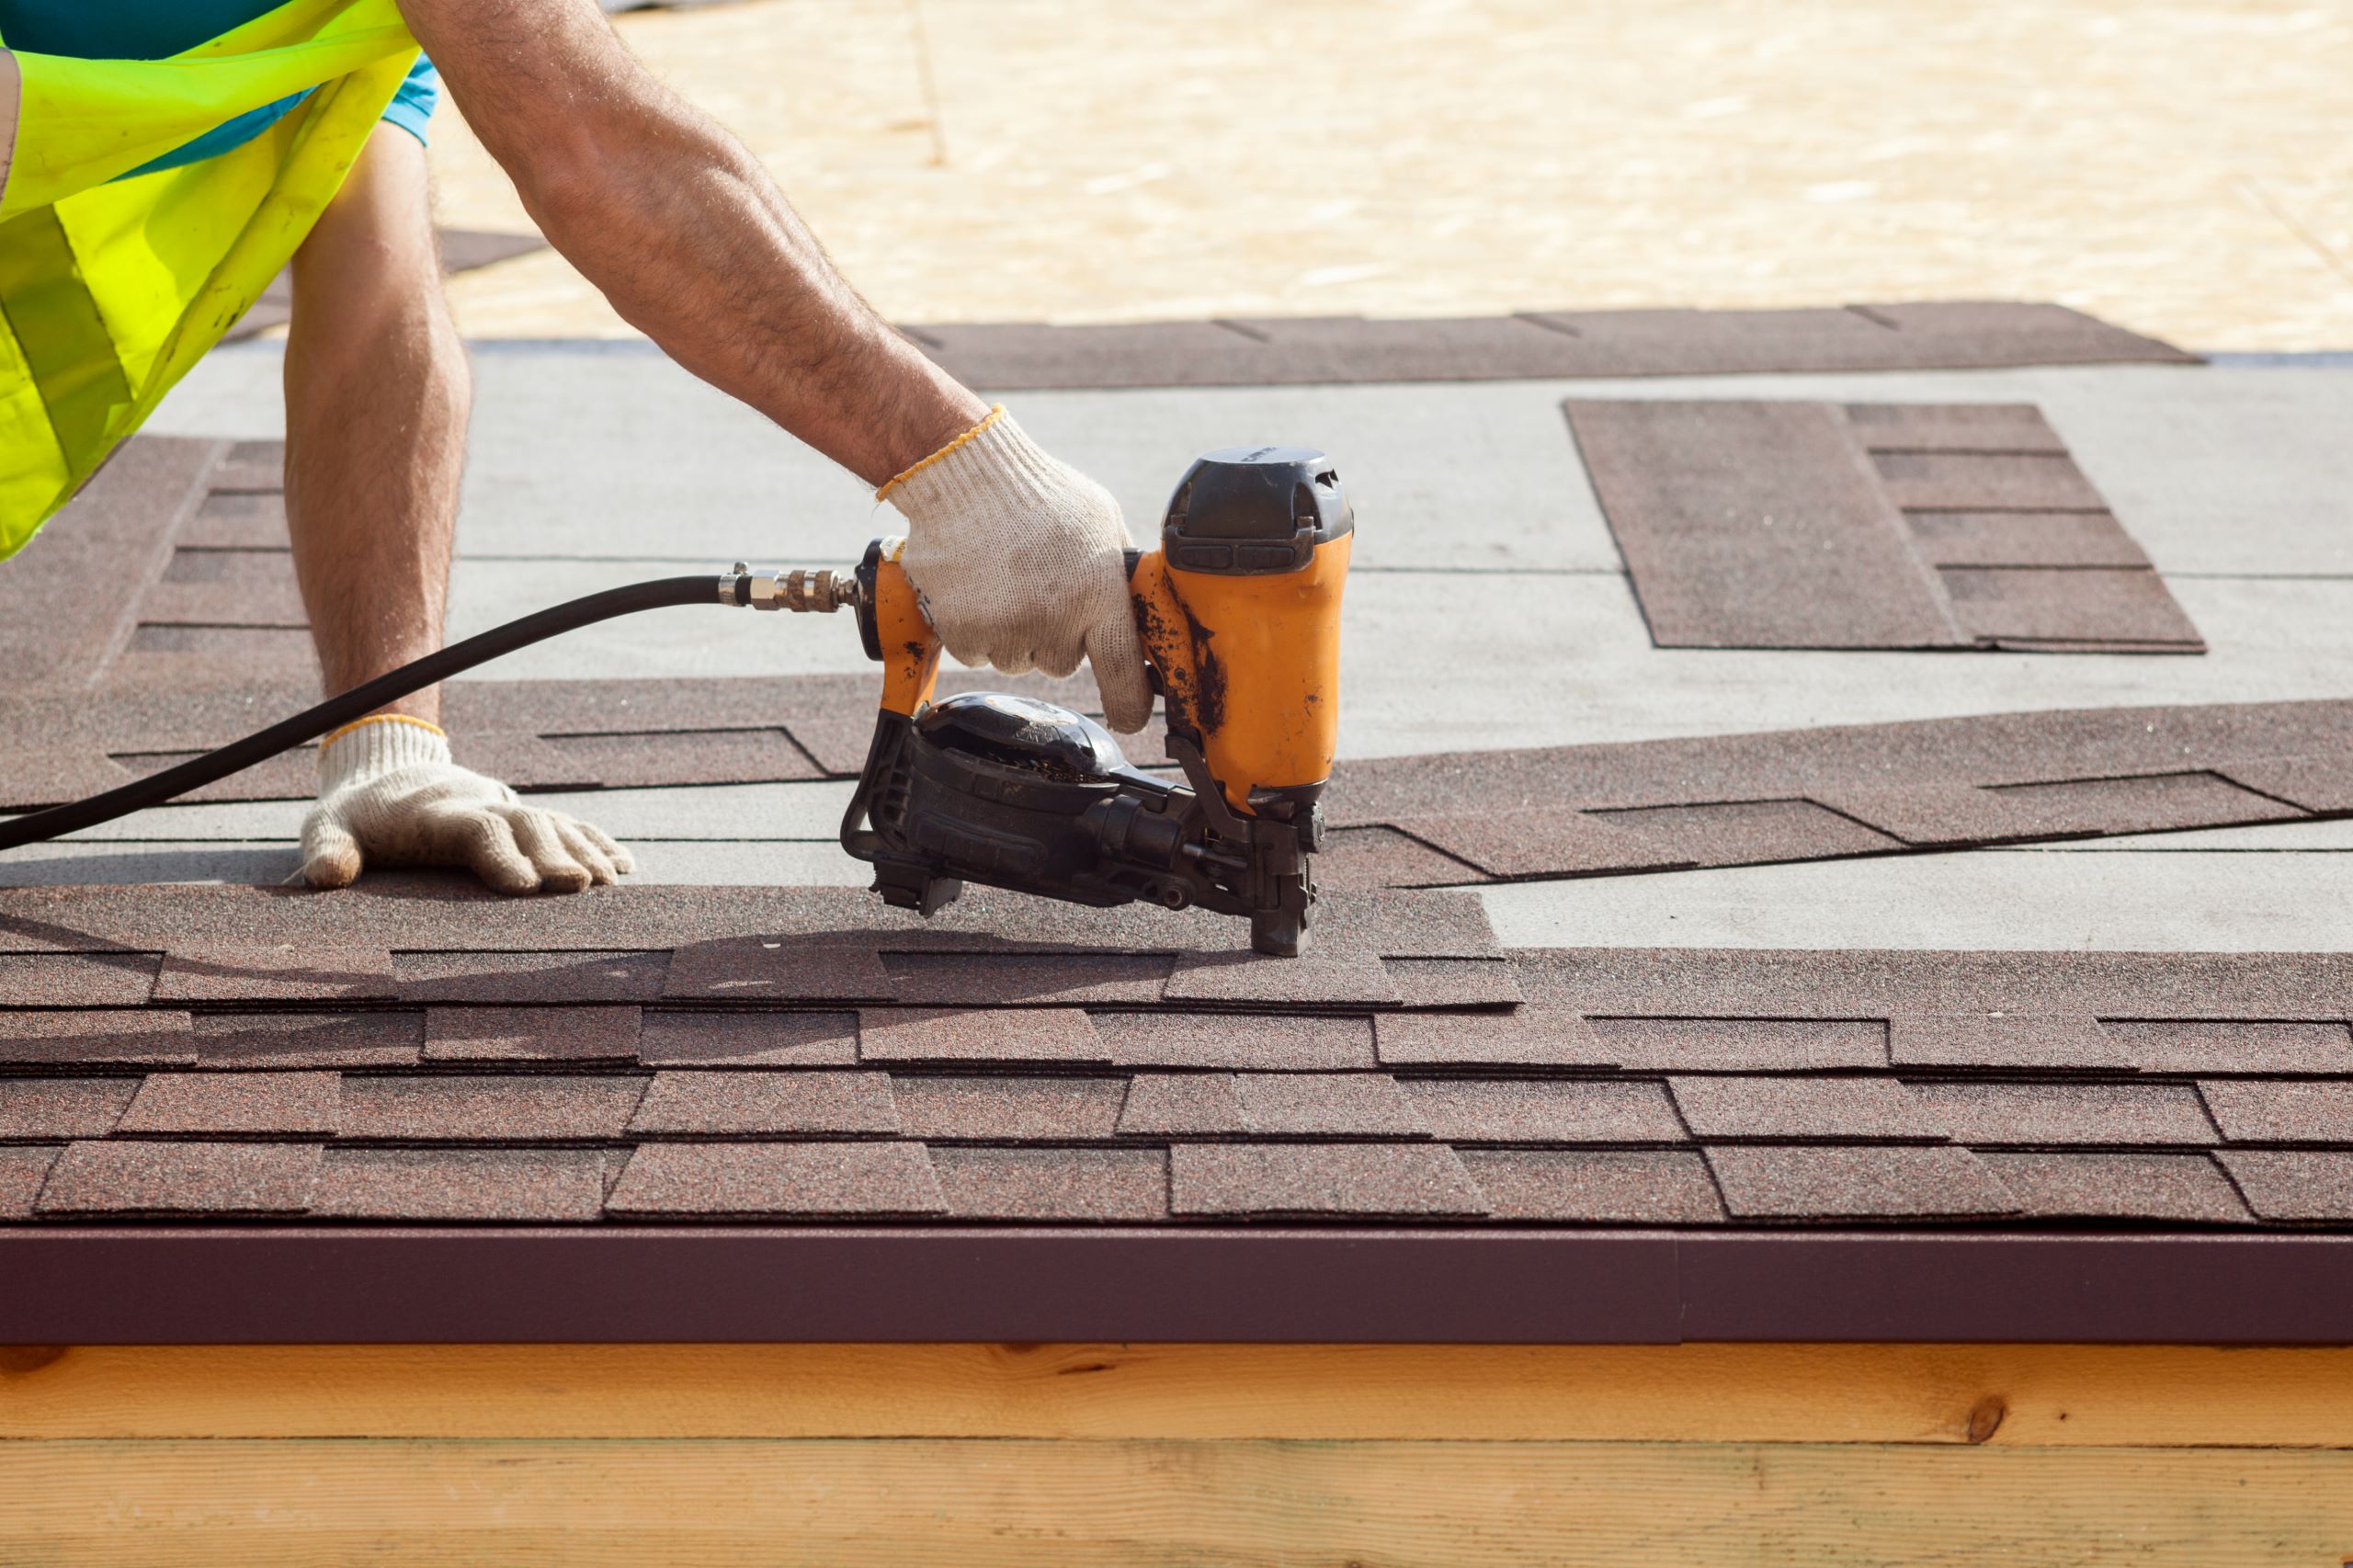 A roofing contractor in a safety vest uses a nail gun to install asphalt shingles on a roof.